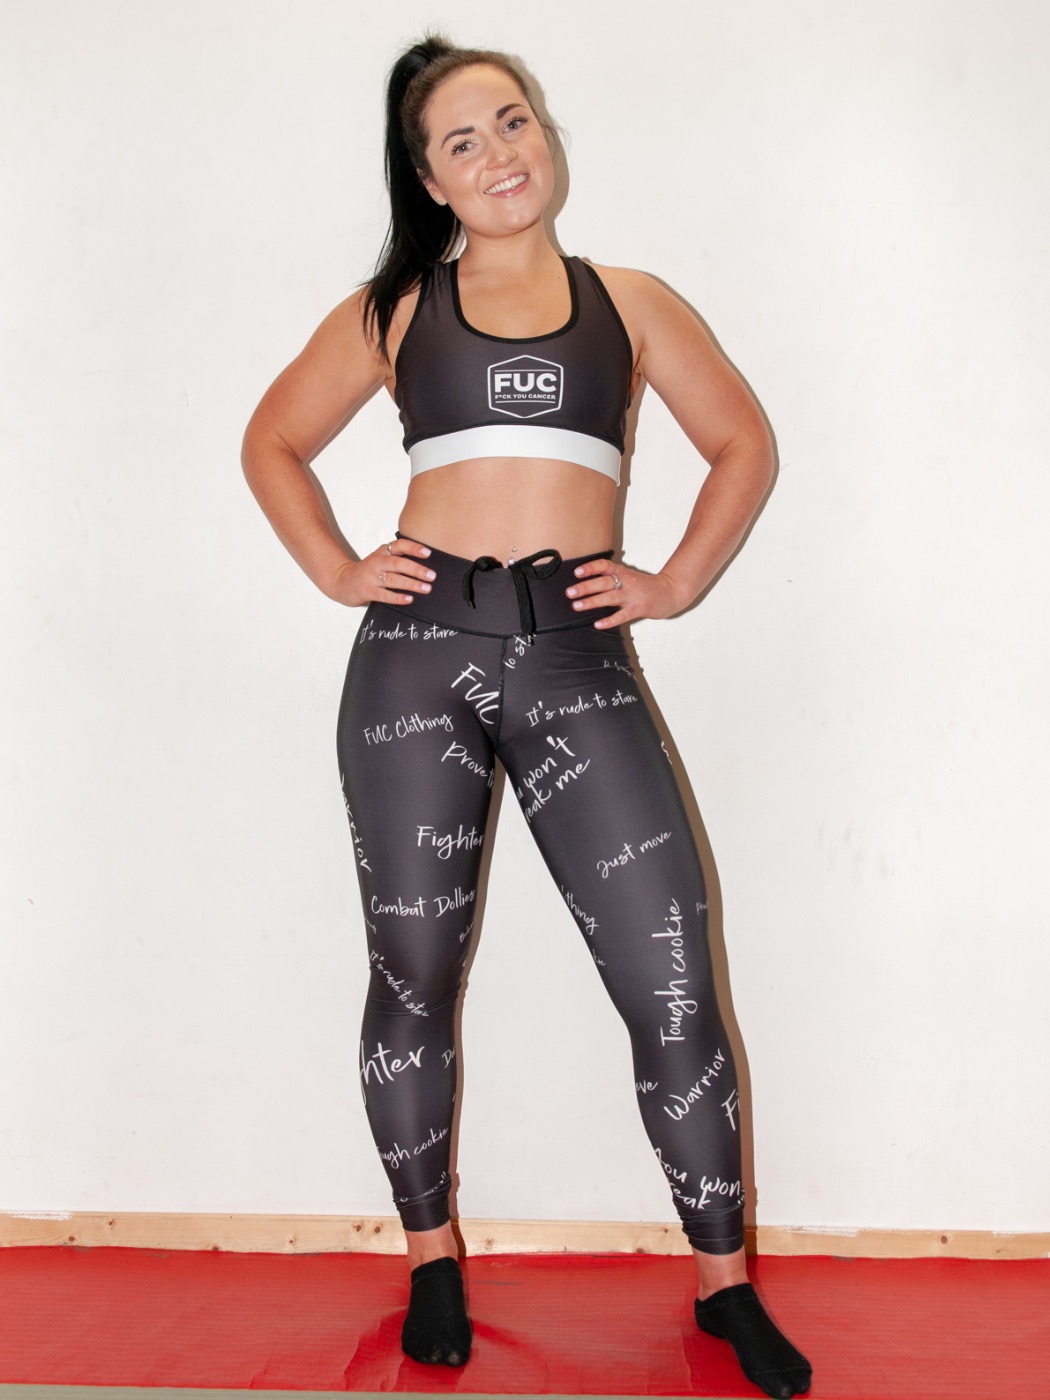 https://fucclothing.com/wp-content/uploads/2019/02/FUC-clothing-Product-The-words-leggings.jpg